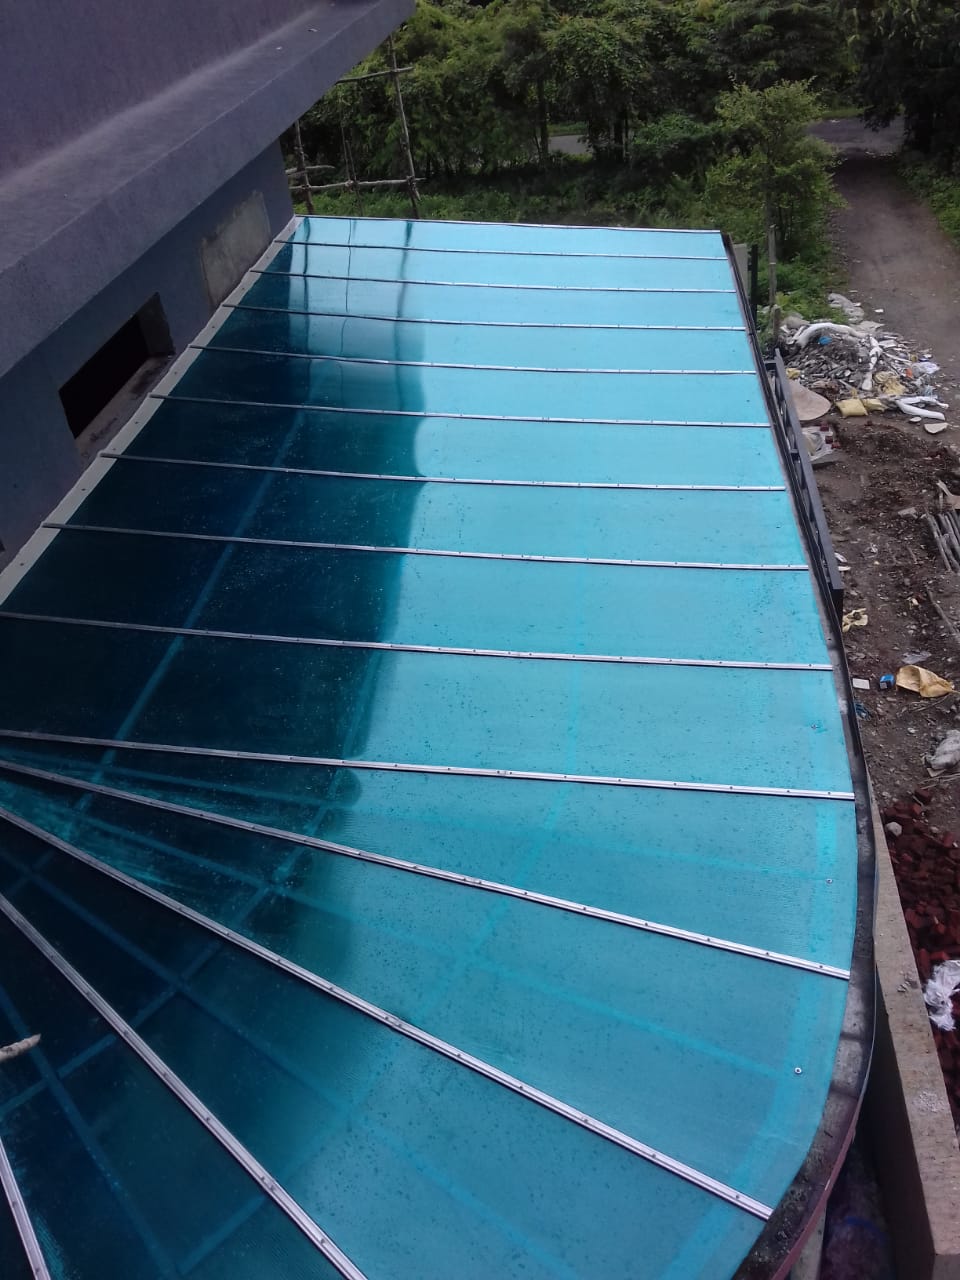 Multiwall / Corrugated Polycarbonate Roofing System